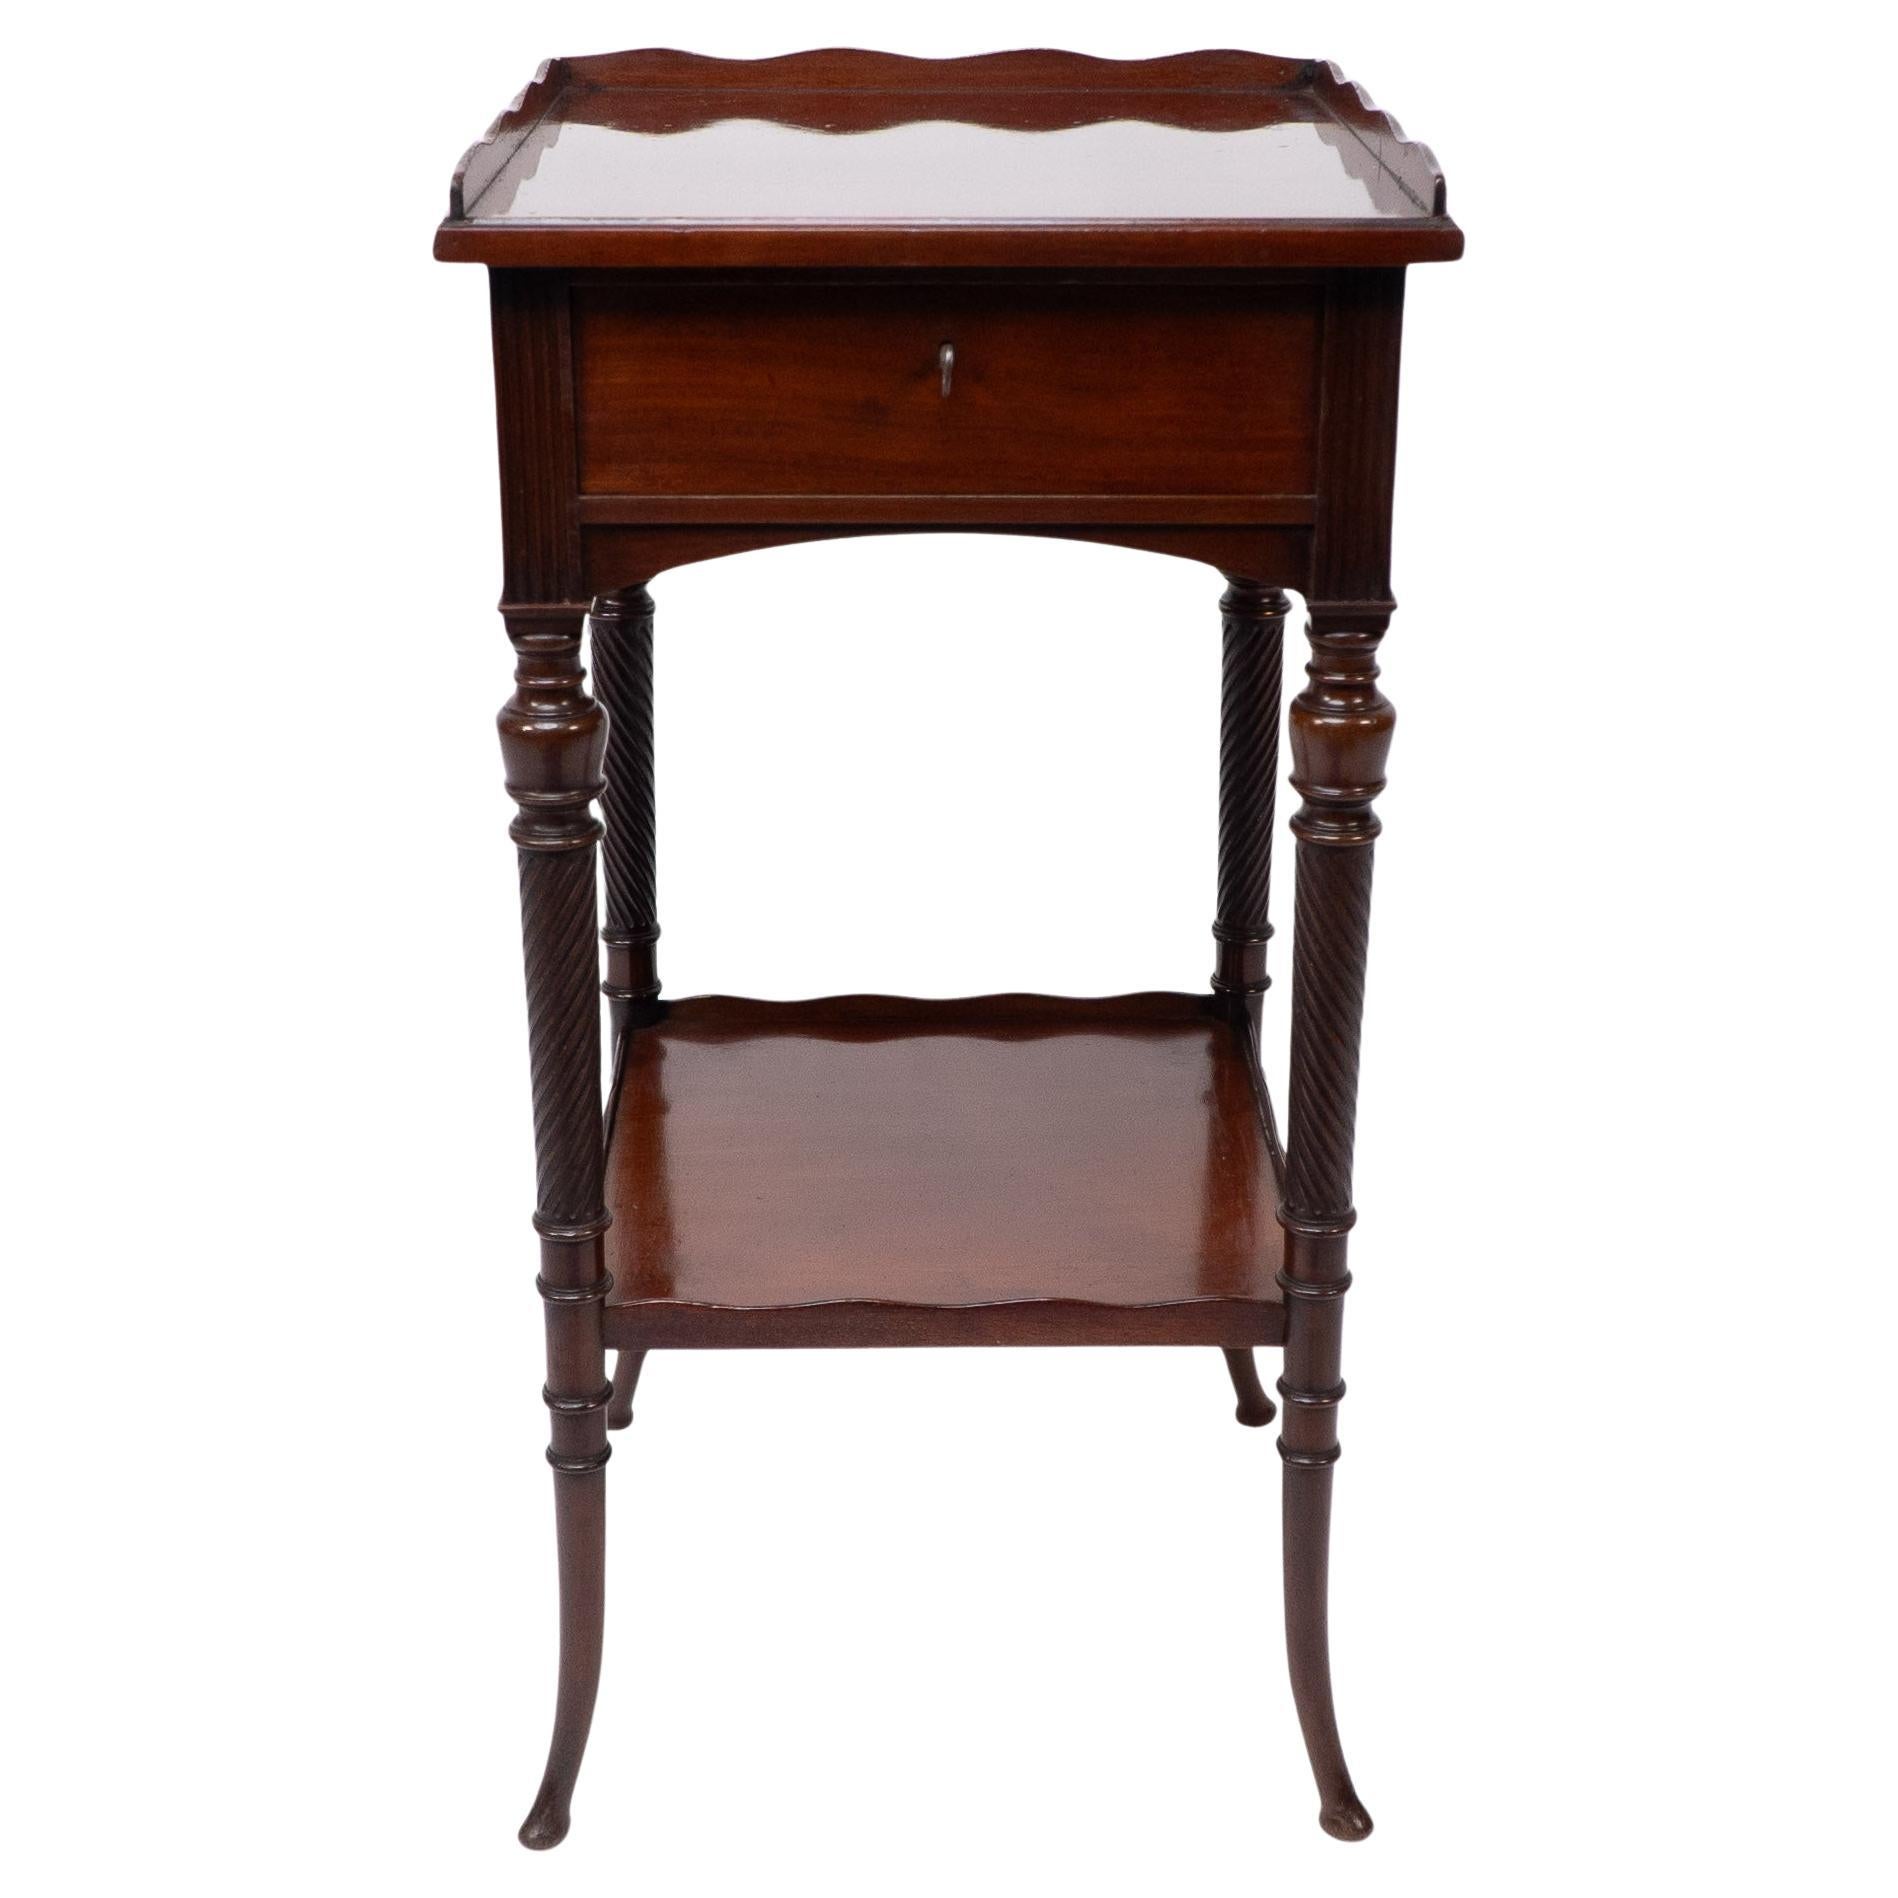 E W Godwin, attributed, made by Collinson & Lock. An Aesthetic movement mahogany side table with spiral-turned legs on out swept feet.With the original lock and key to the drawer.Collinson and Lock of London 'Art Furnishers', founded with the